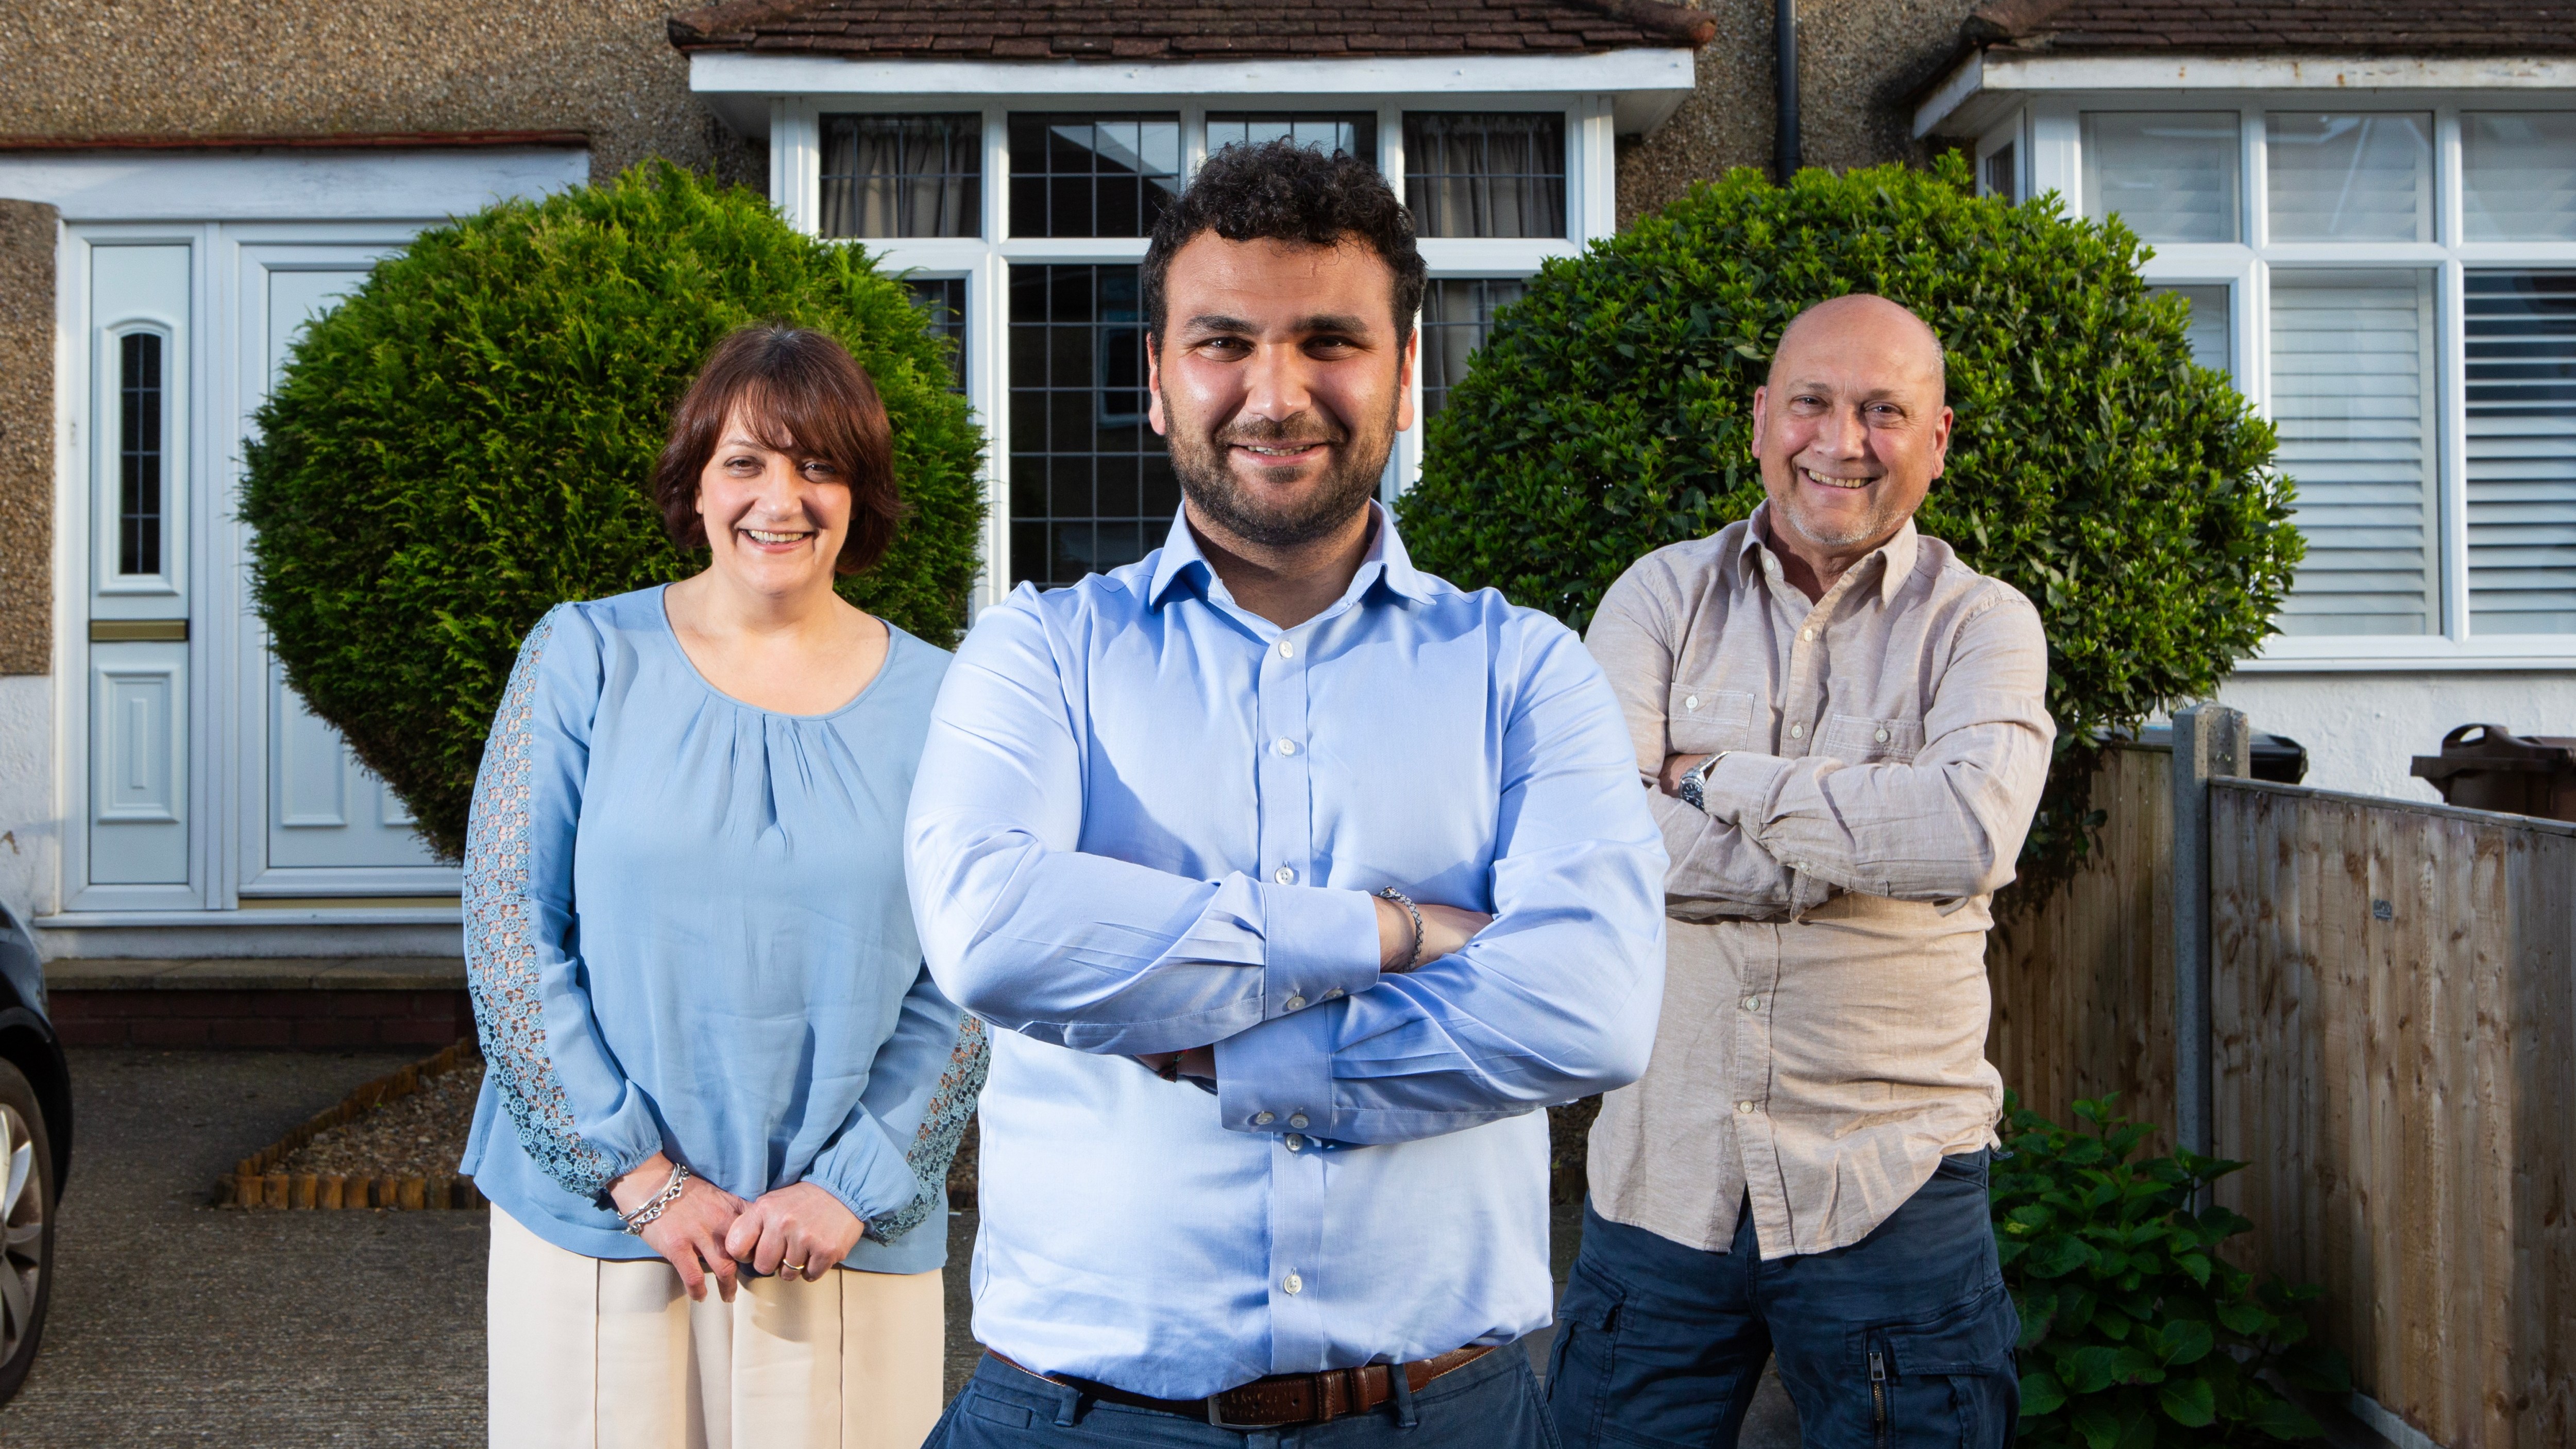 Samuel Carro moved back in with his parents, Lorena and Antonio, in St Albans last year after he finished university